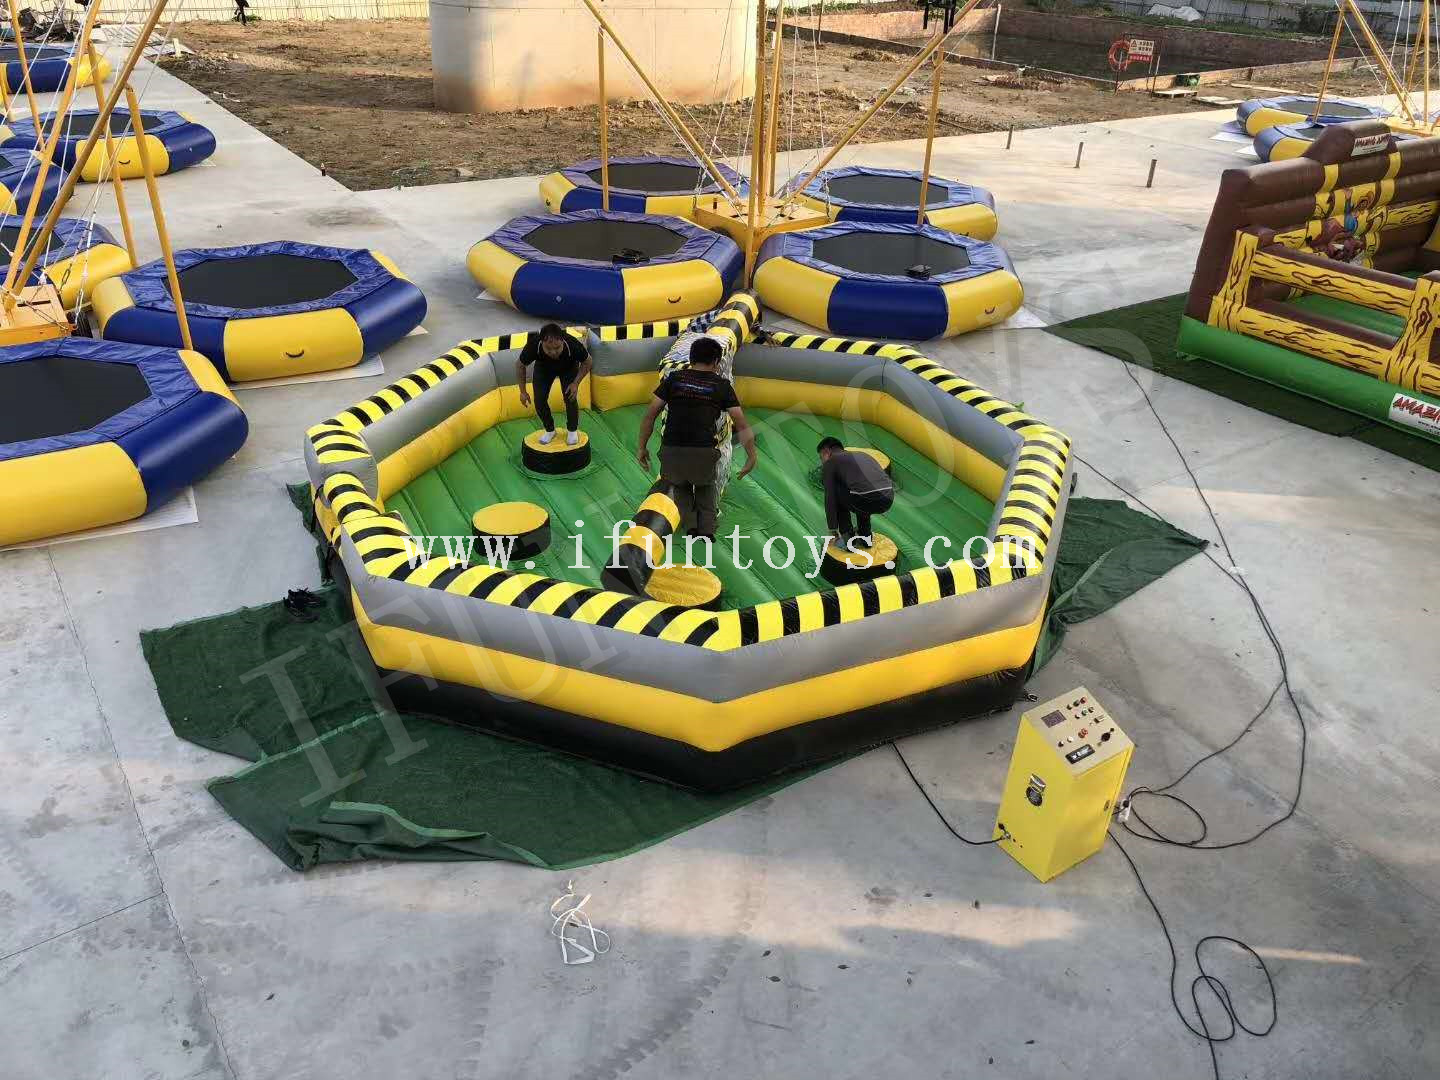 Interactive Inflatable Meltdown Challenge Last Man Standing Game / Wipeout Jump